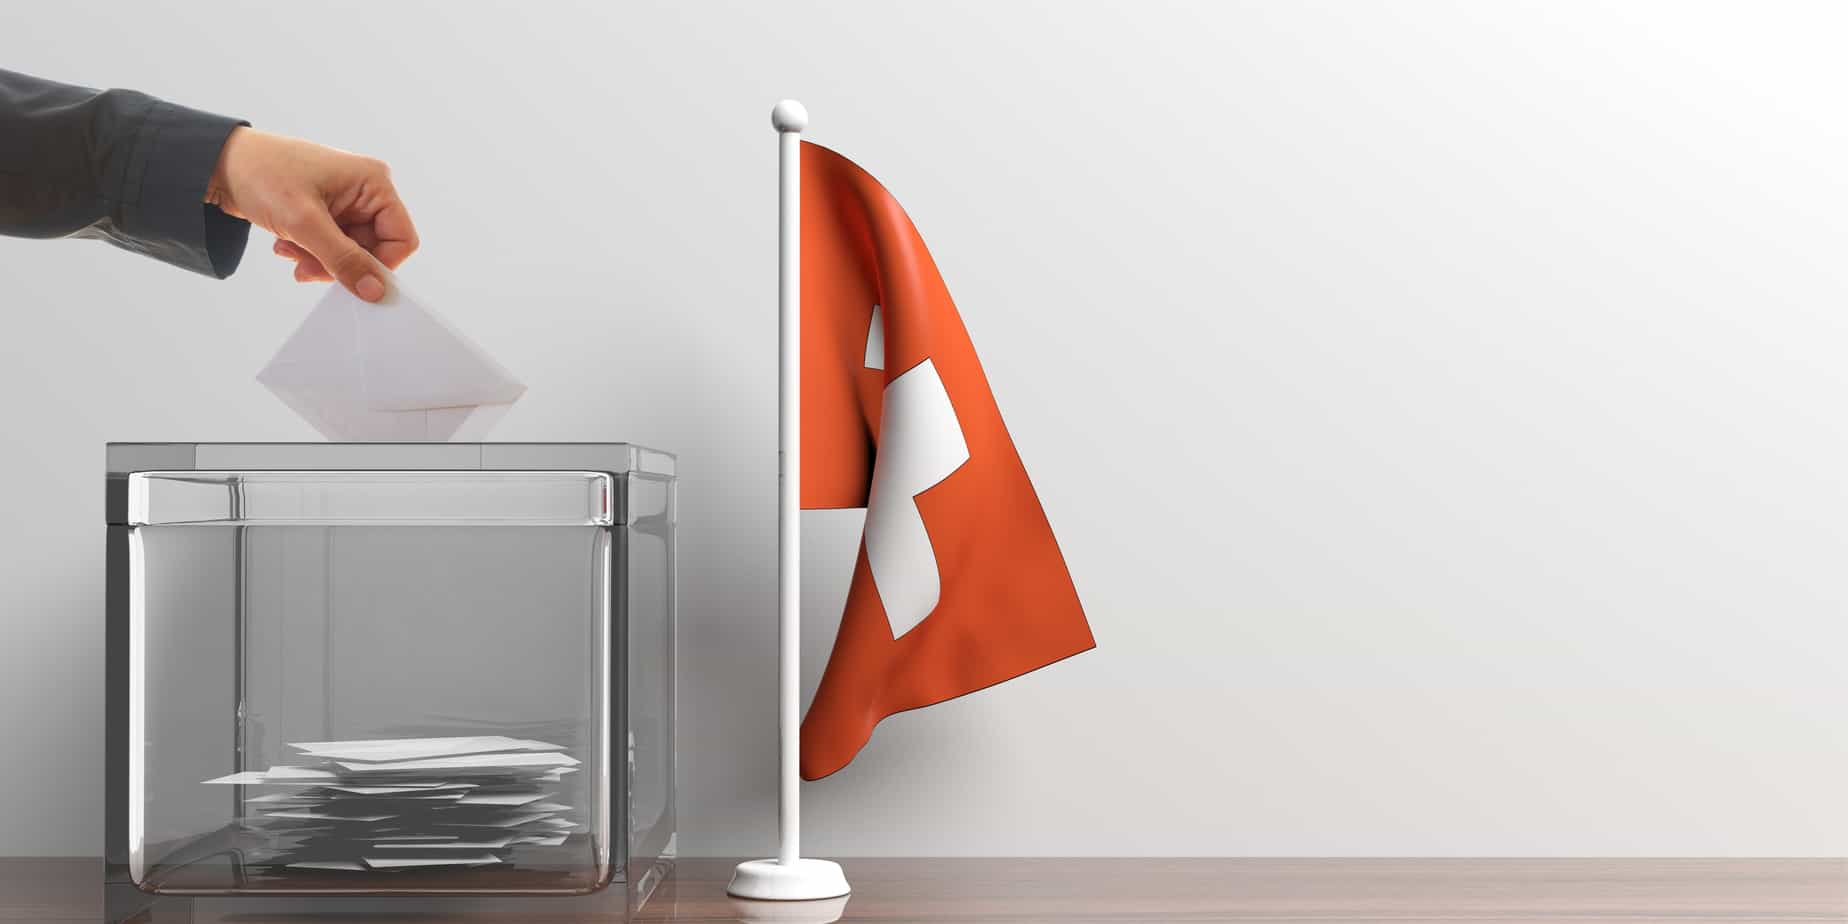 Swiss Federal Election: More than one election